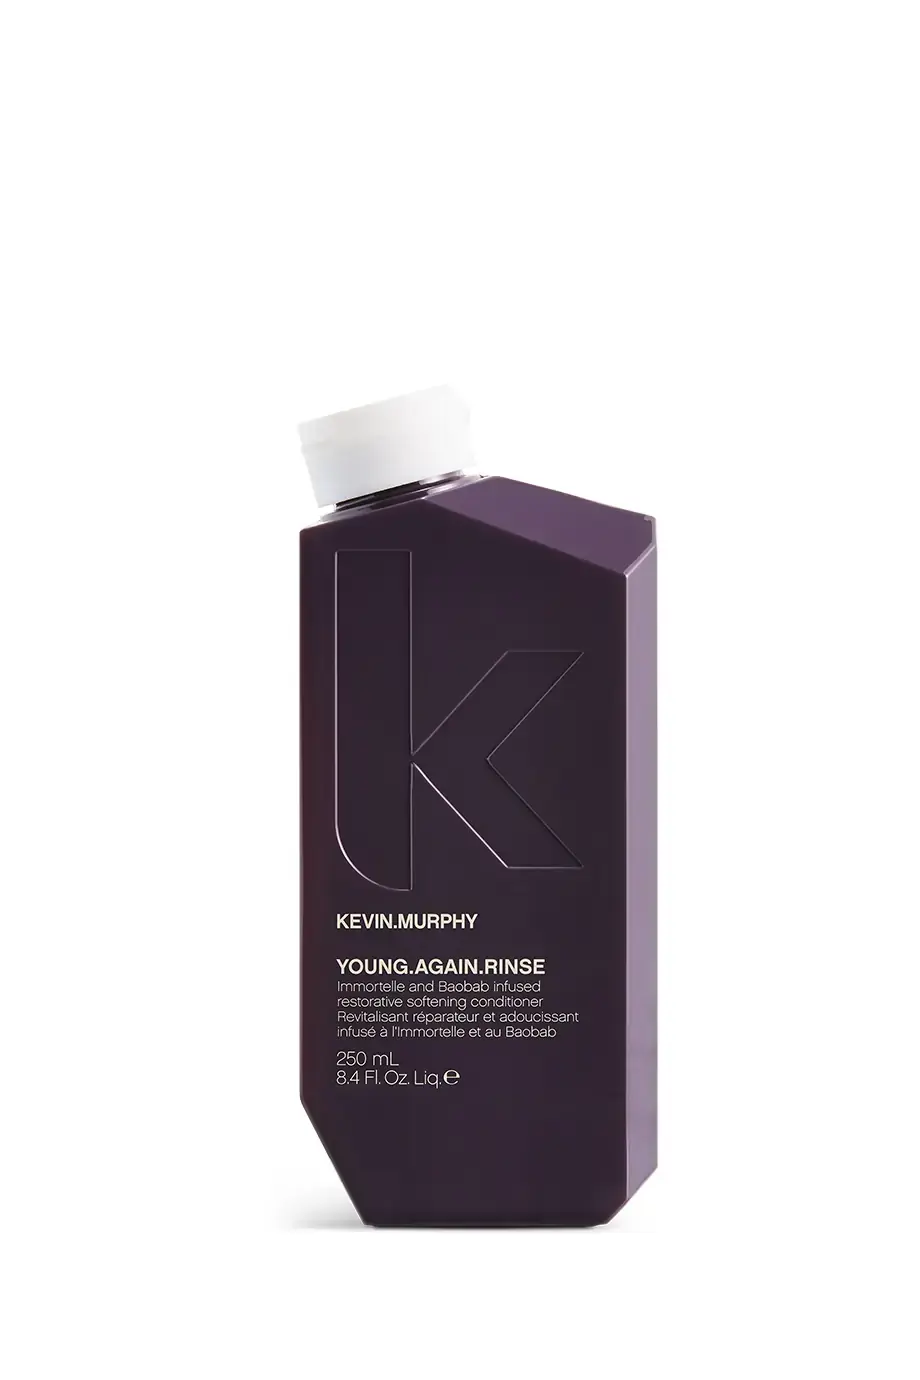 KEVIN.MURPHY Young.Again.Rinse